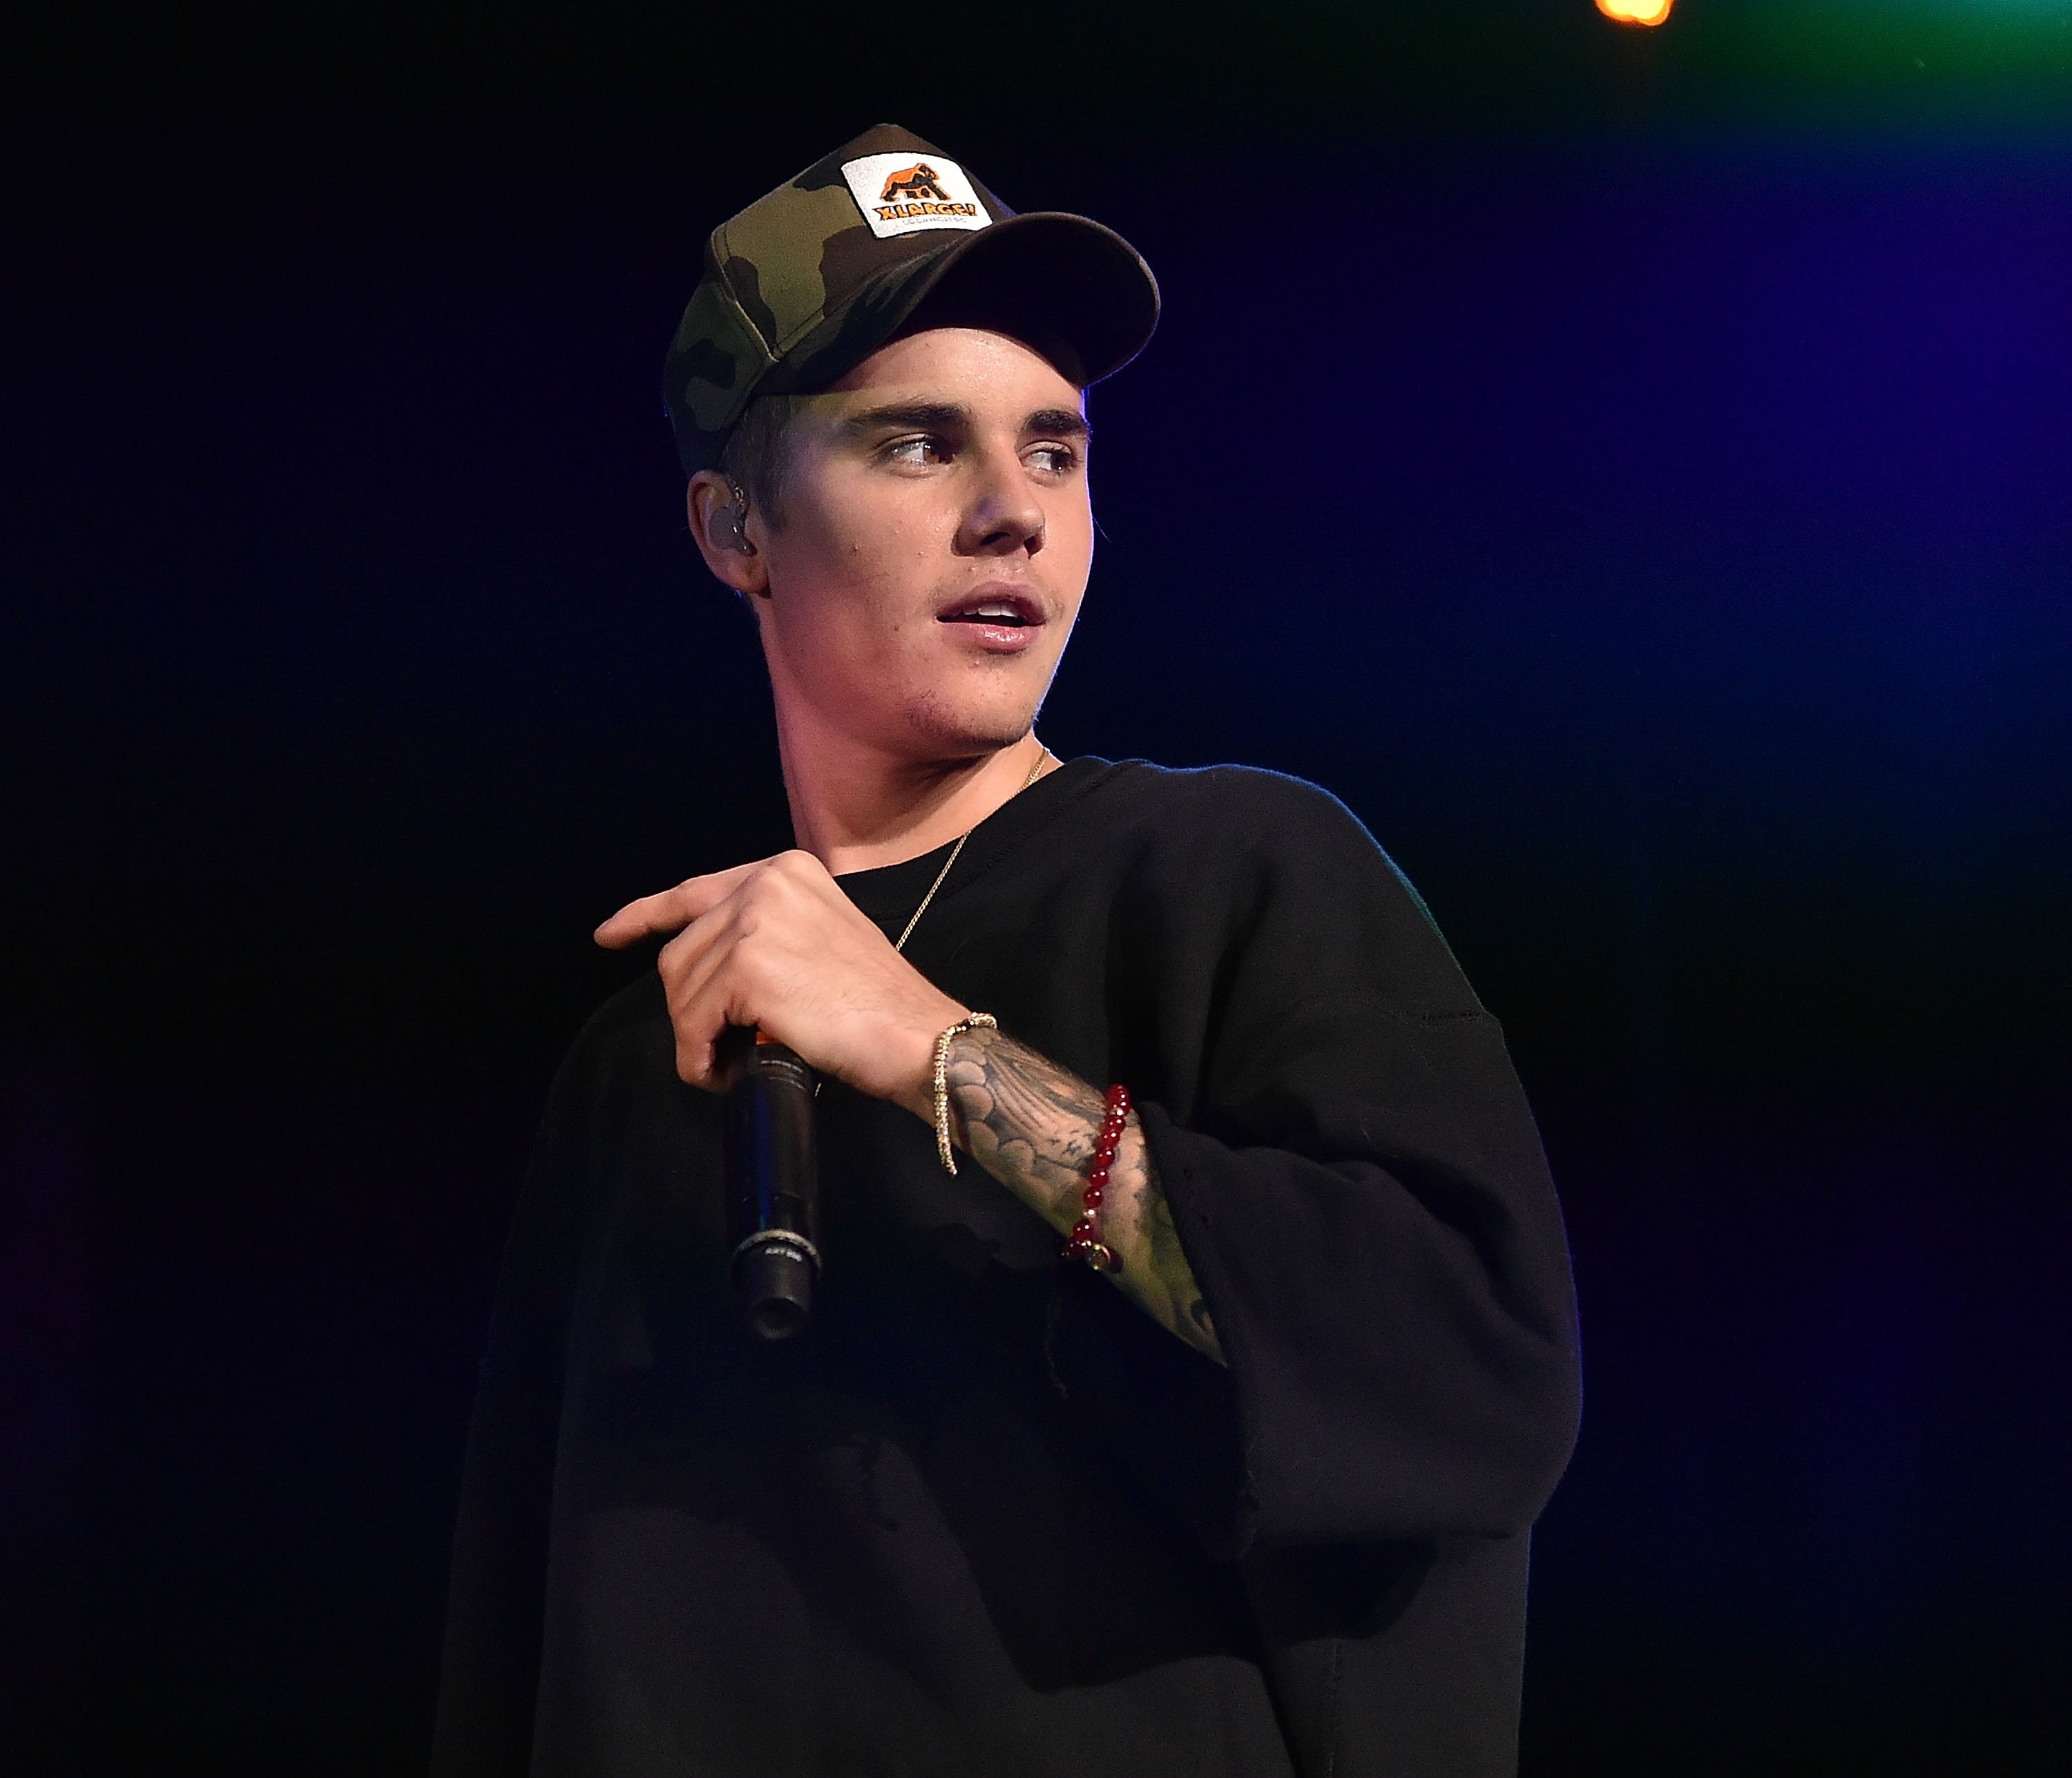 Justin Bieber performs onstage at Power 96.1's Jingle Ball 2015 at Phillips Arena on December 17, 2015 in Atlanta, Georgia | Photo: Getty Images